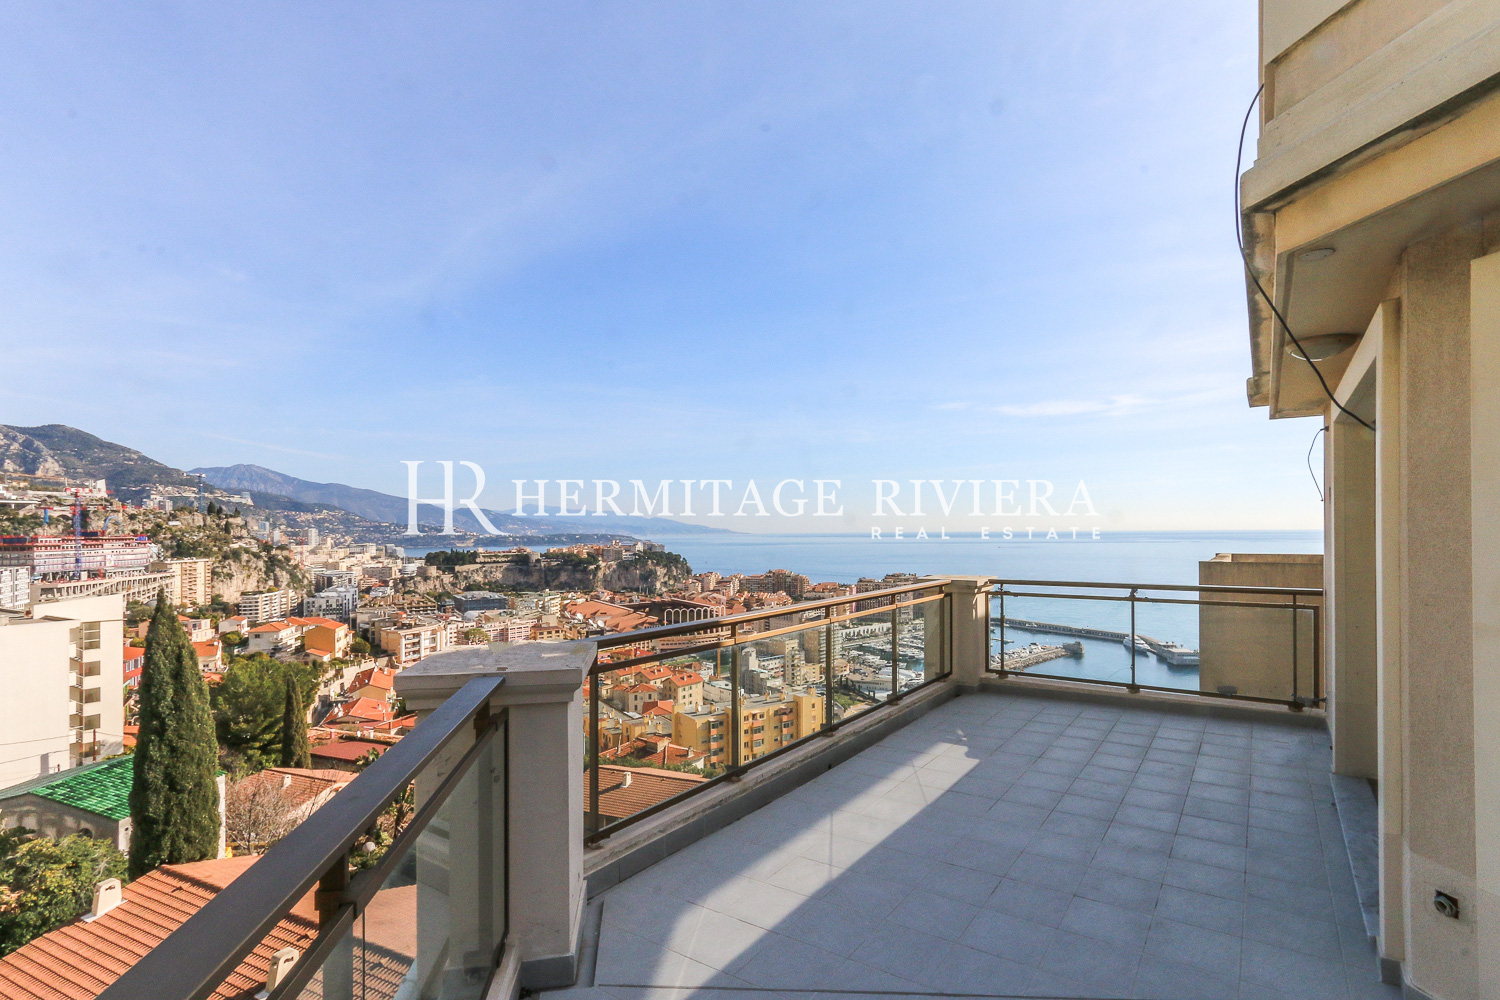 Apartment to renovate with views over Monaco (image 2)